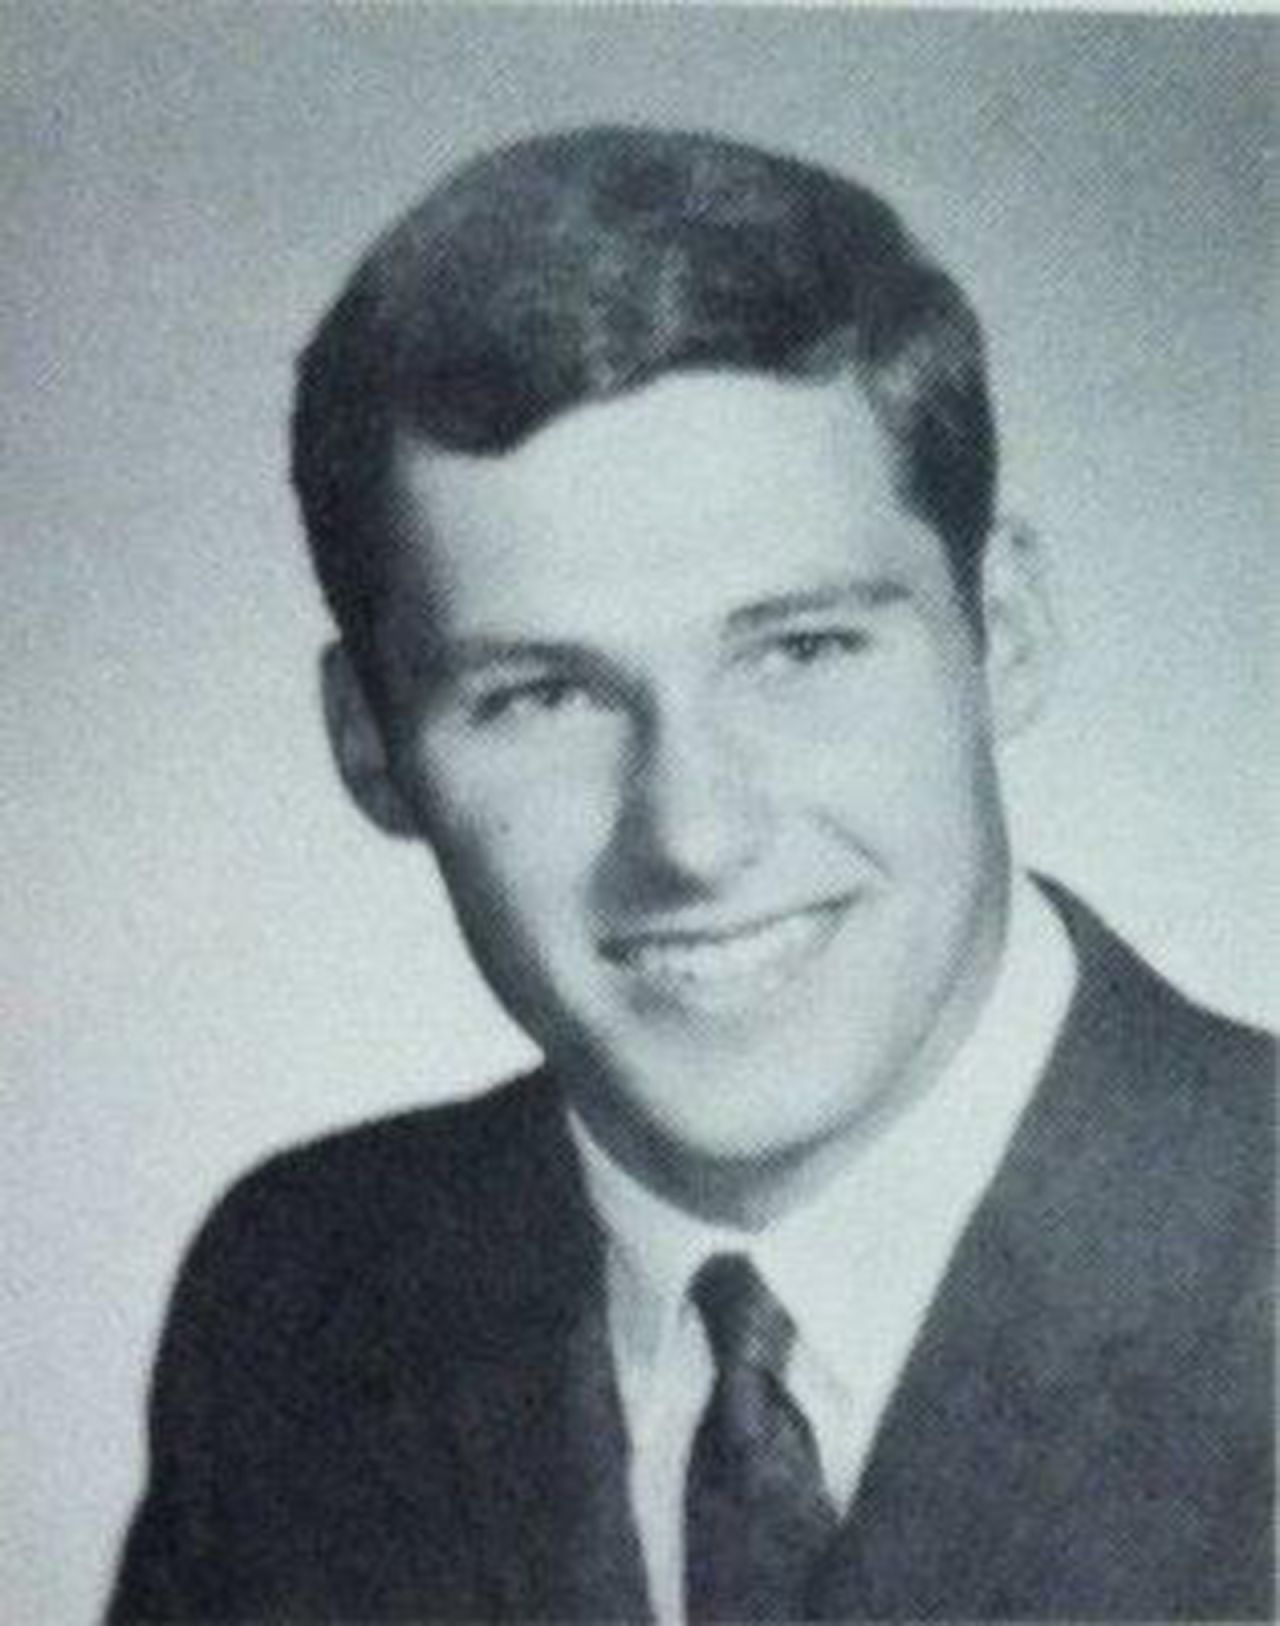 Inslee was born and raised in Seattle. He attended Ingraham High School and was a star athlete who played football and basketball. The basketball team won the state title in his senior year.